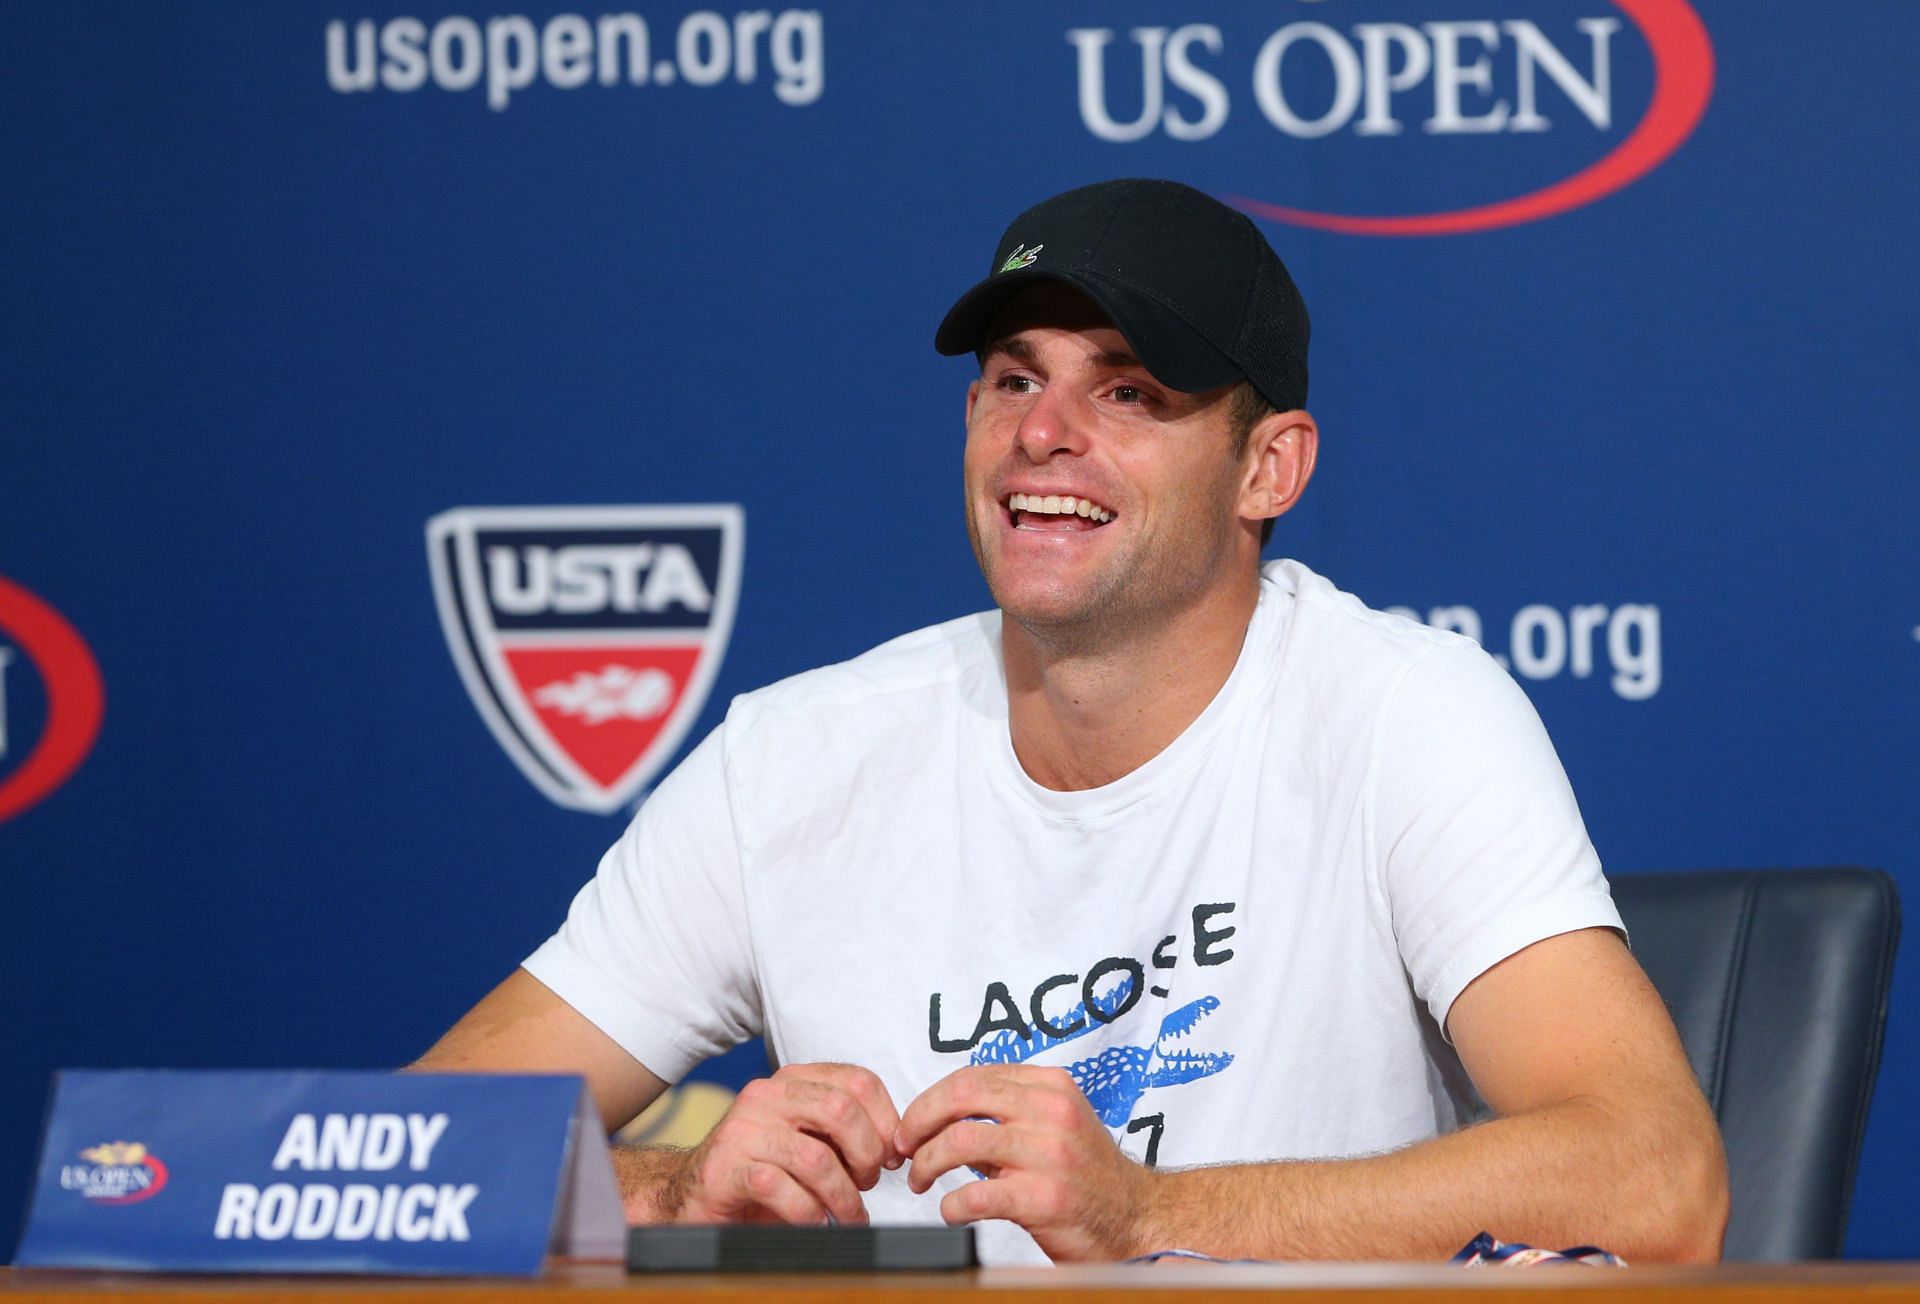 Andy Roddick speaking to the press at the 2012 US Open